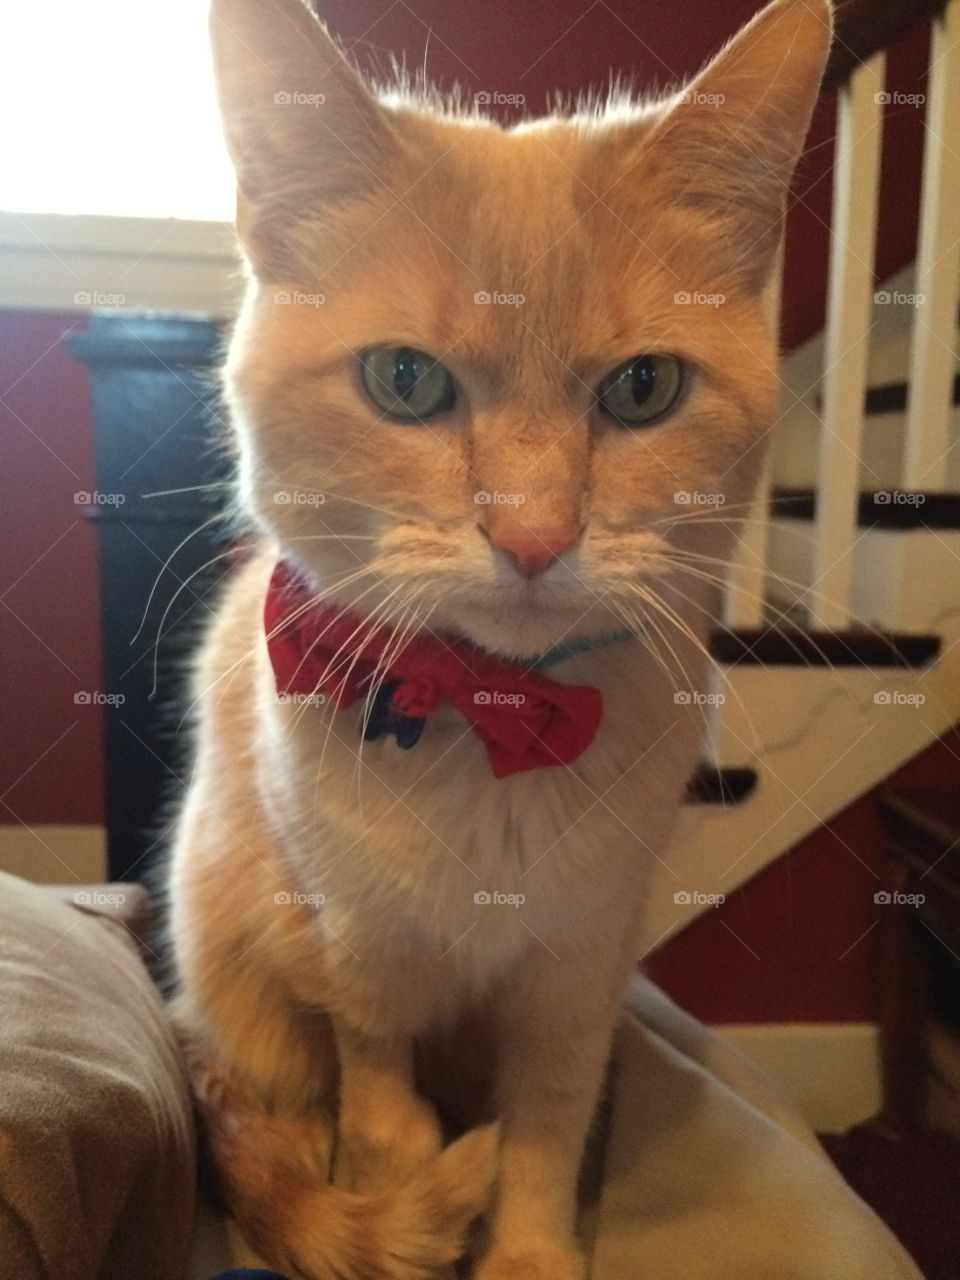 This is my bow tie 